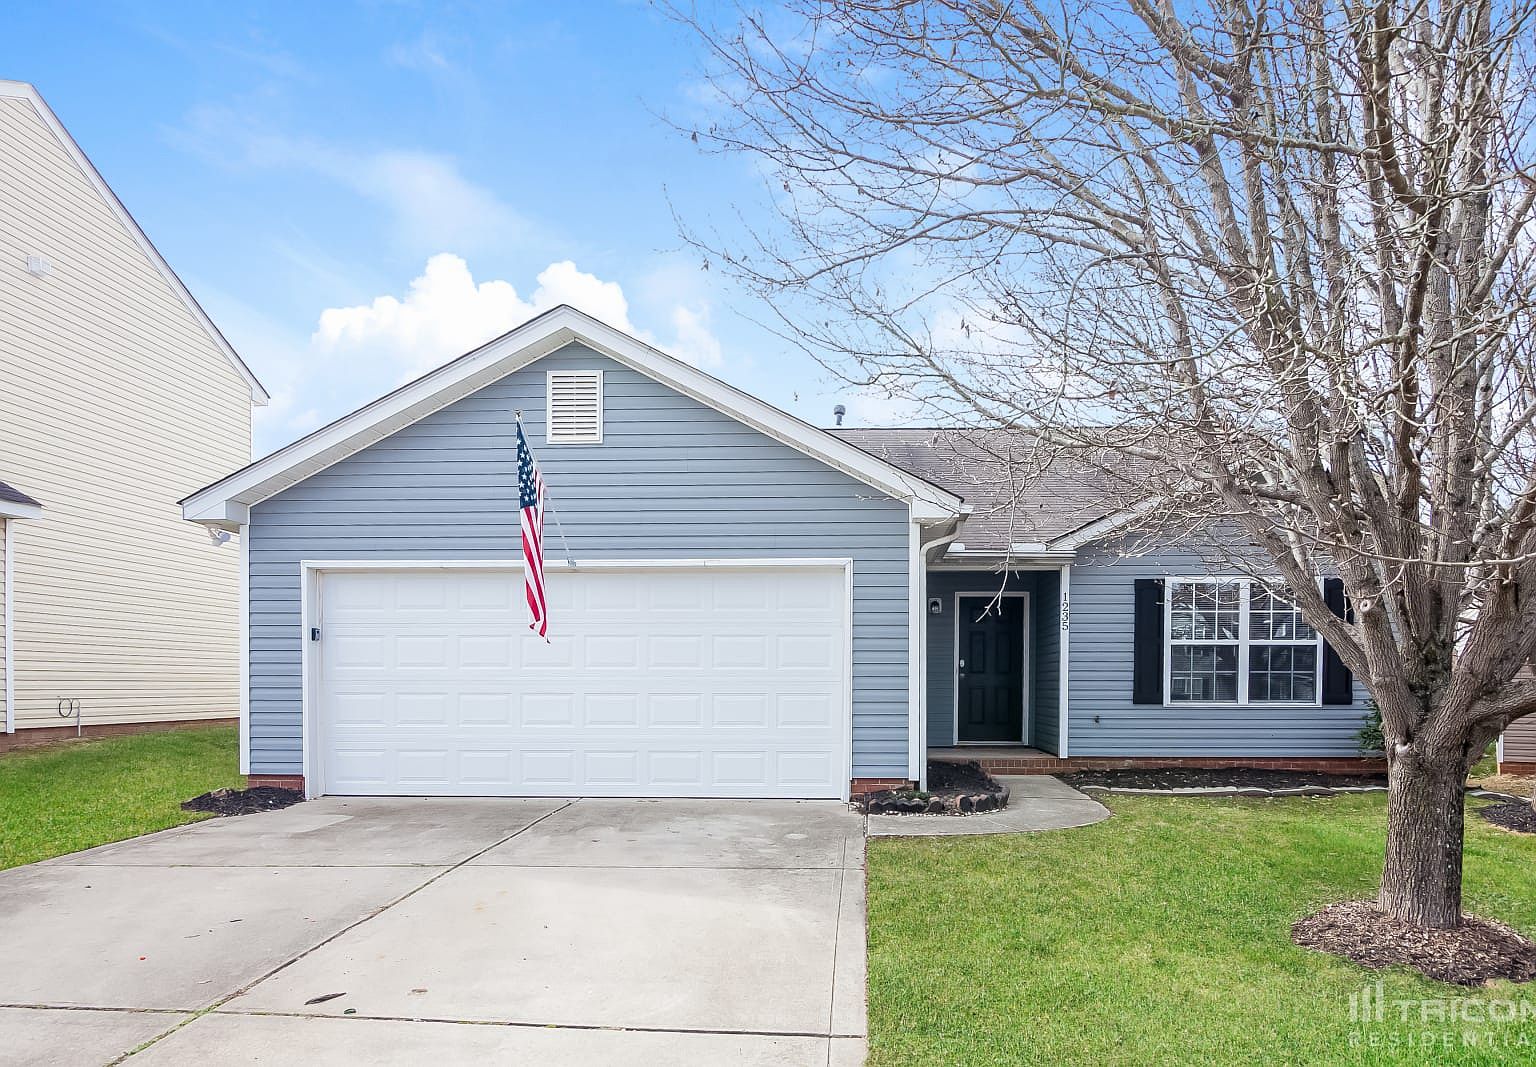 1235 Elise Marie Dr, Charlotte, NC 28214 | Zillow